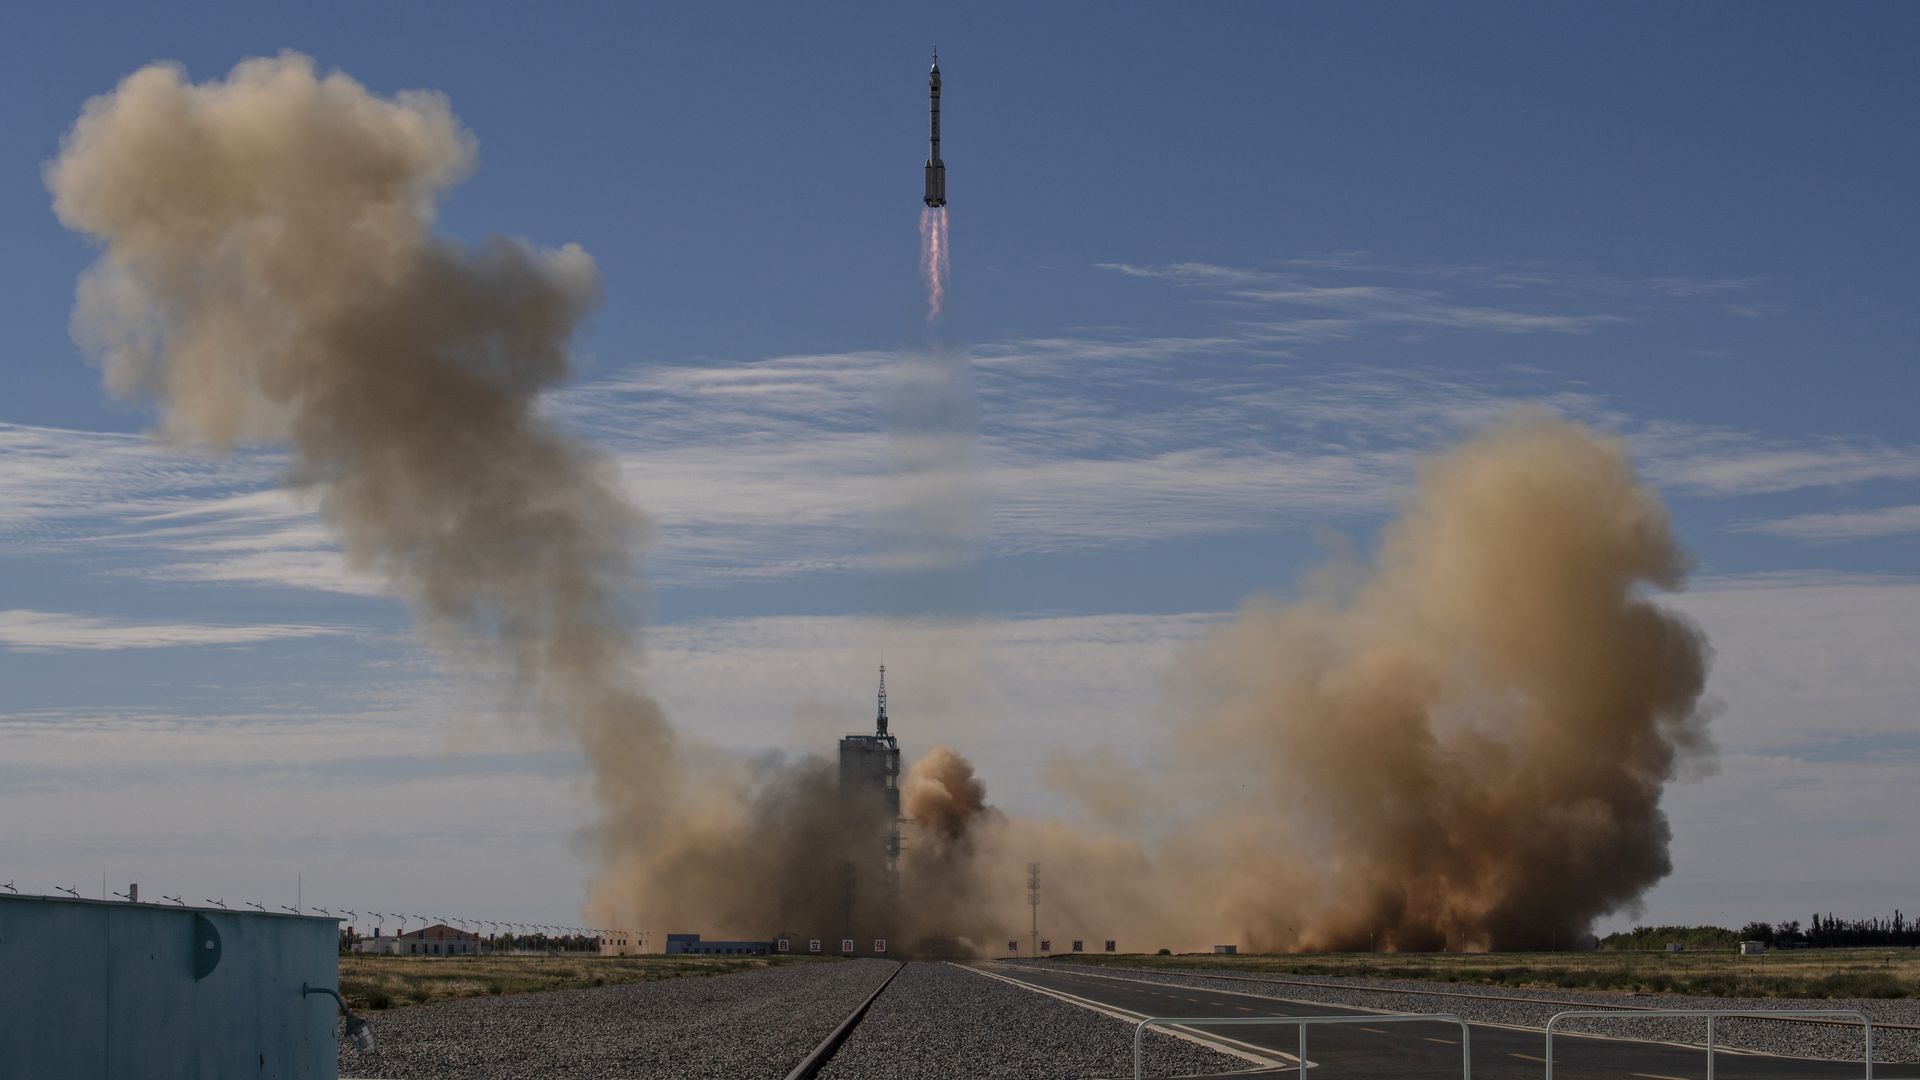 The manned Shenzhou-12 spacecraft from China's Manned Space Agency onboard the Long March-2F rocket launches at the Jiuquan Satellite Launch Center on June 17, 2021 in Jiuquan, Gansu province, China. 